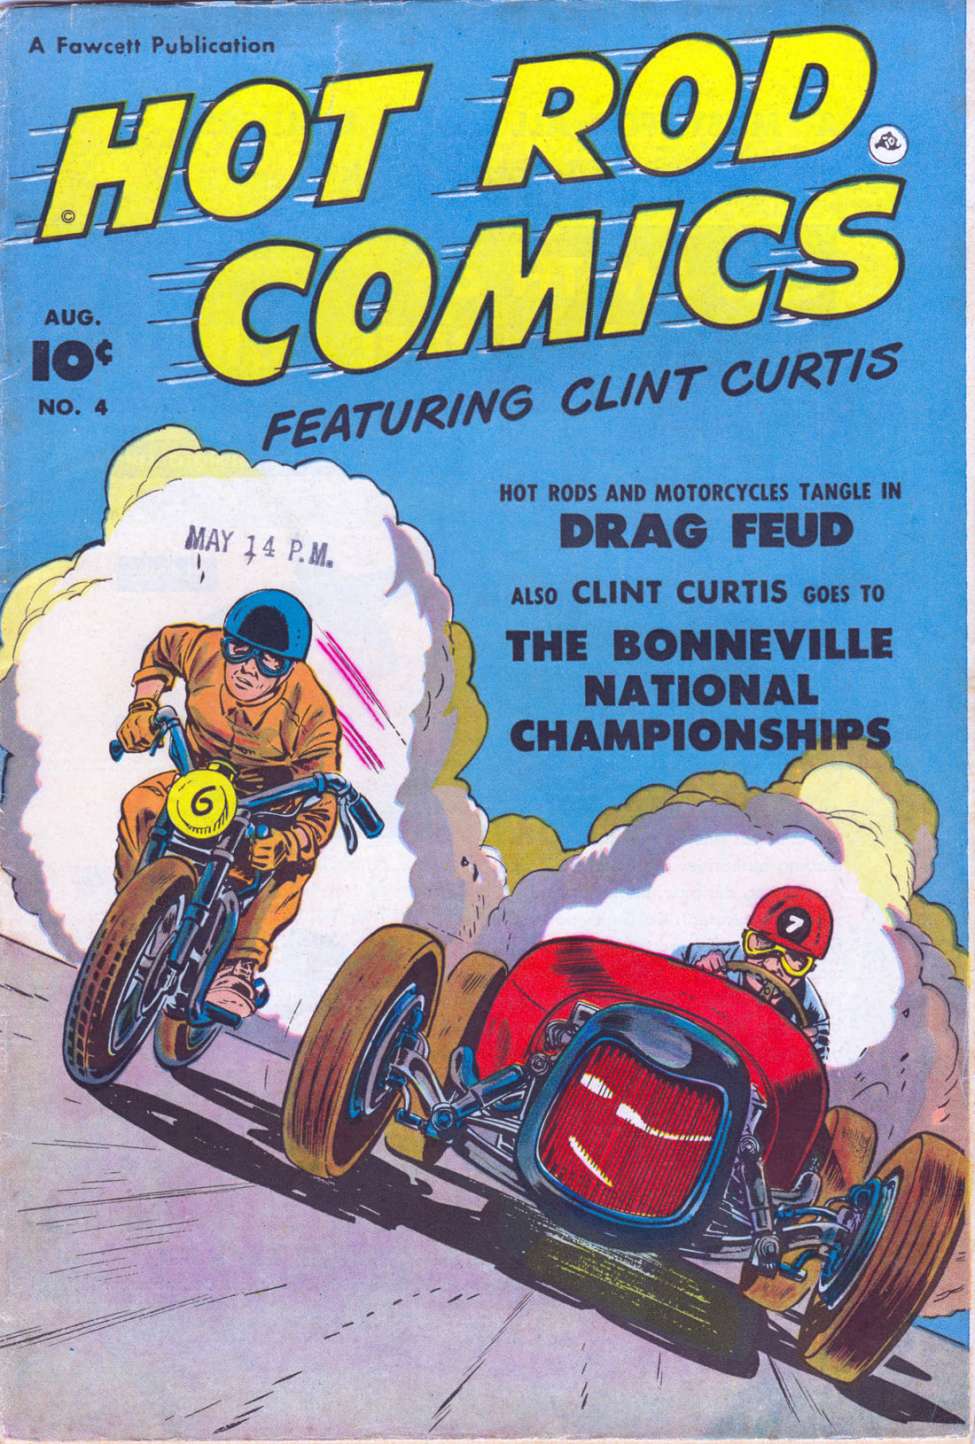 Book Cover For Hot Rod Comics 4